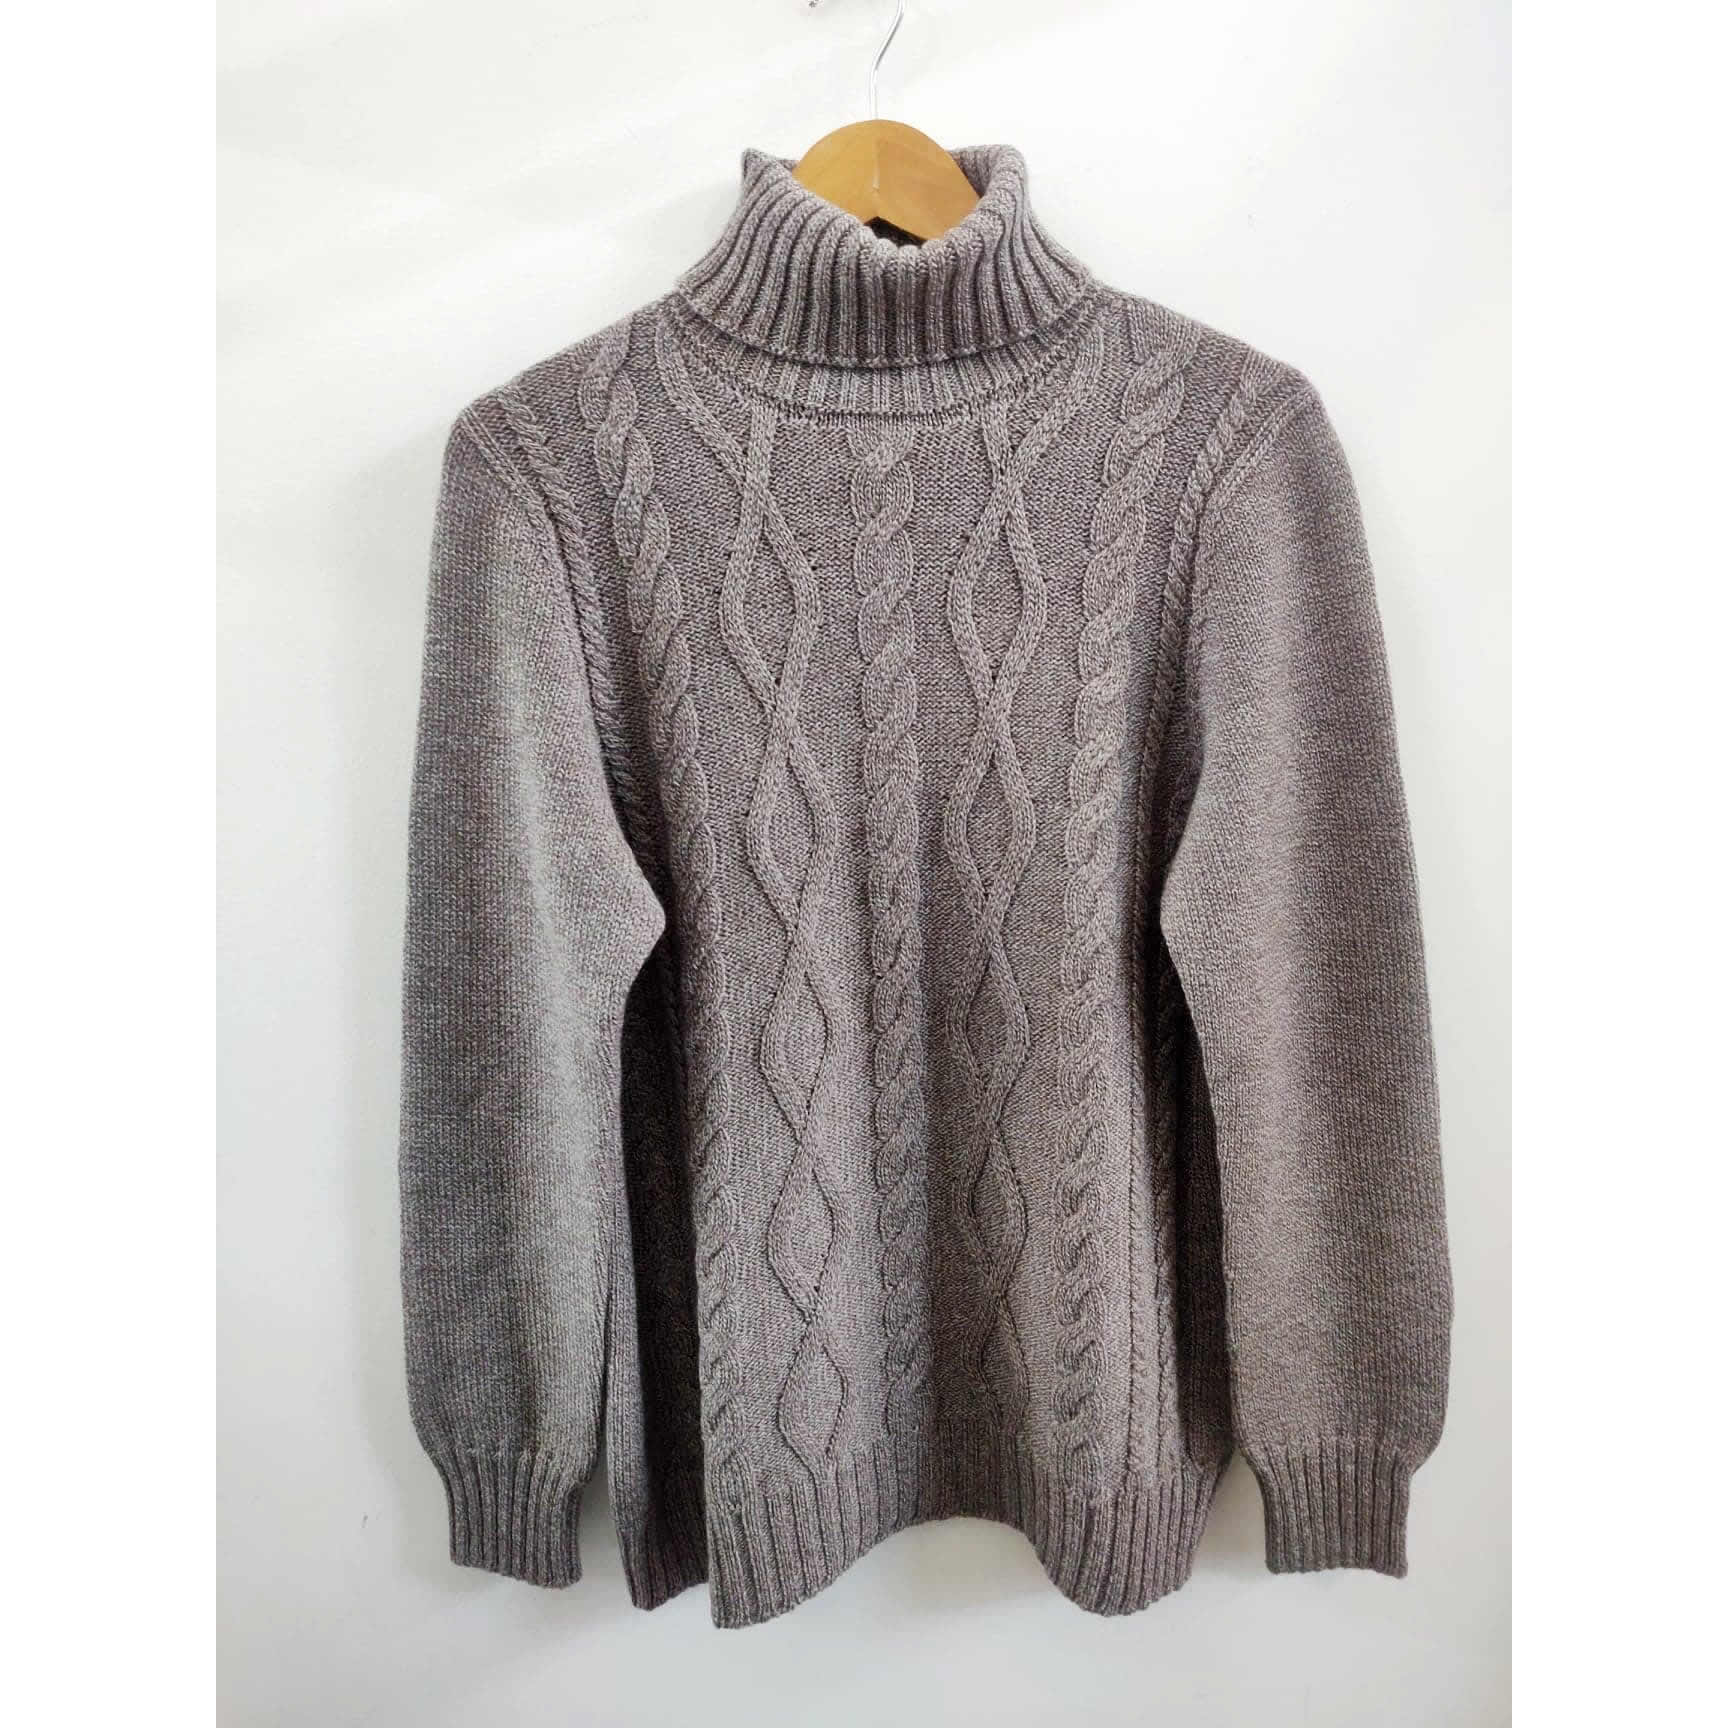 Buy Merino Snug Armstrong Cable Jumper · AfterPay Zip · The Wool Room